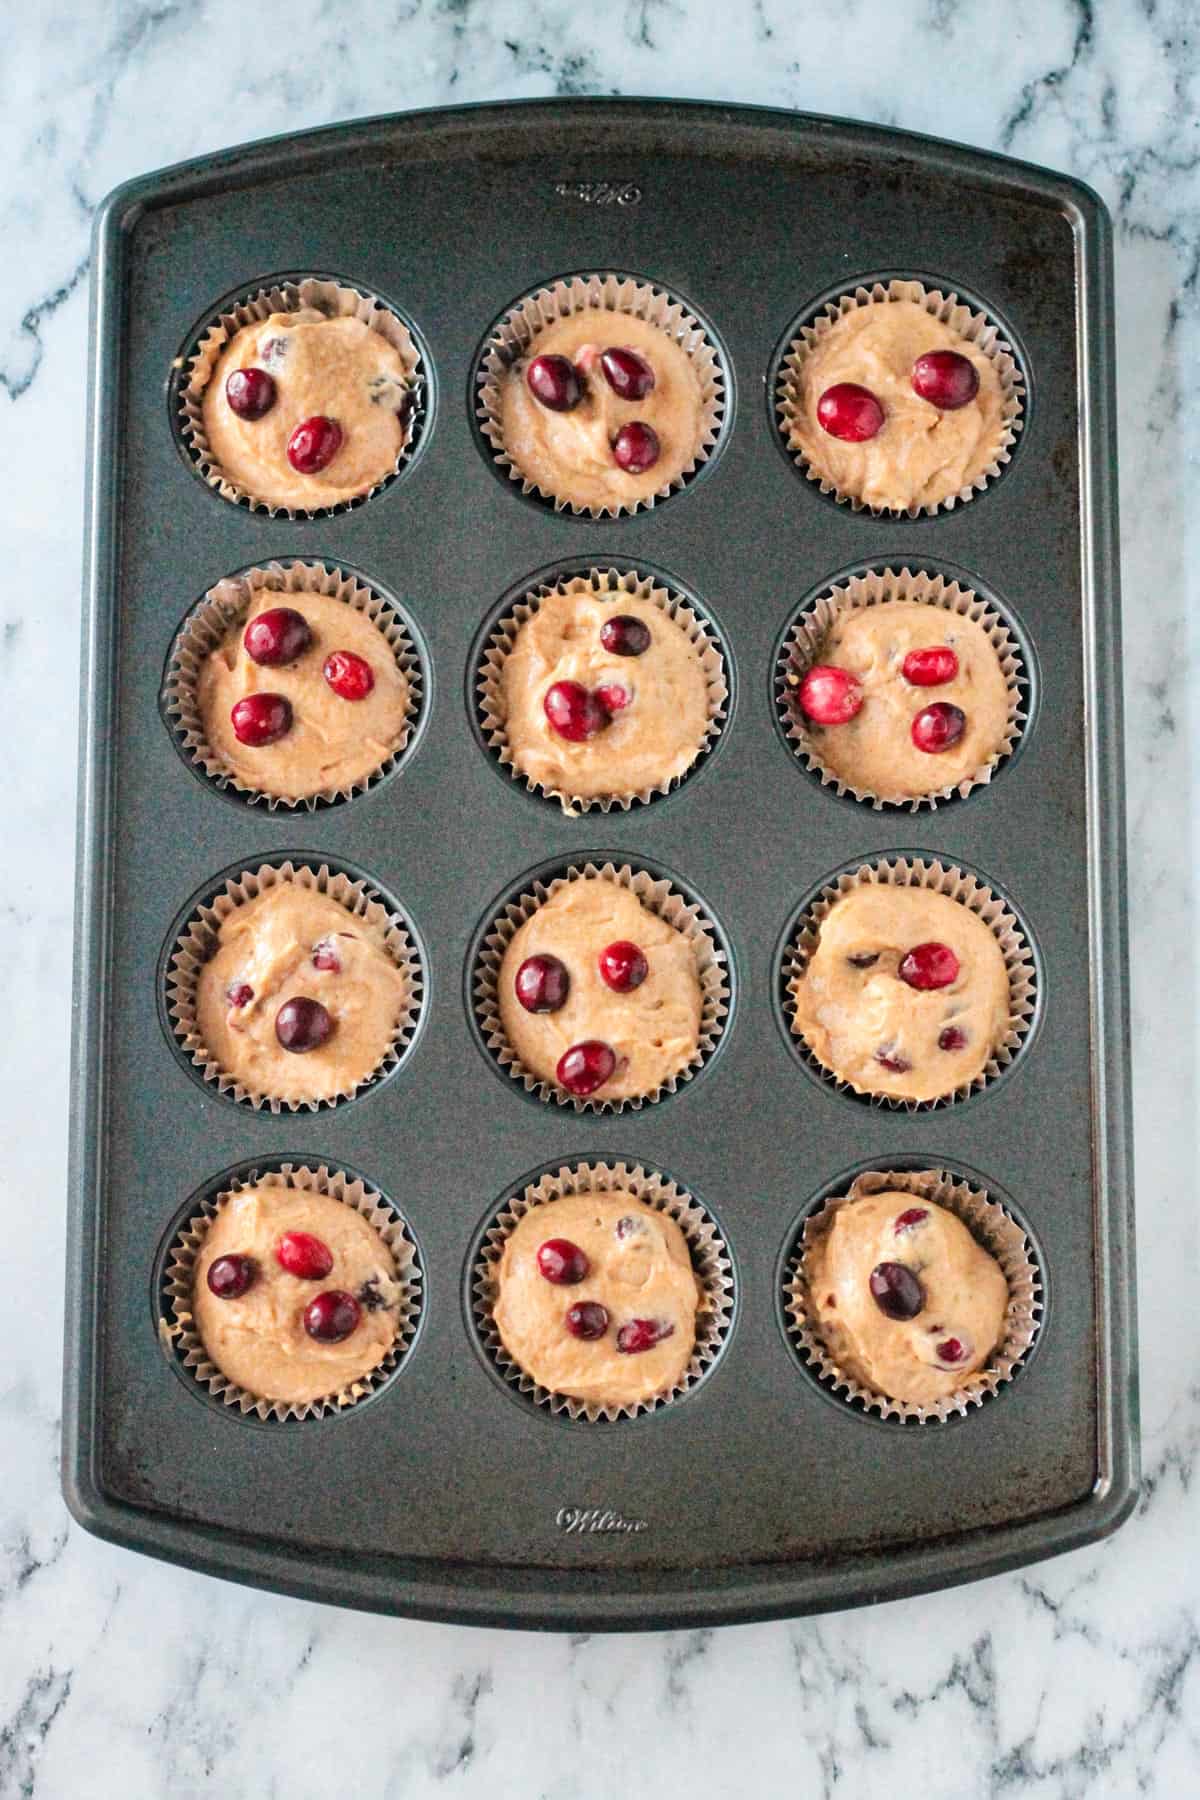 Fresh cranberries dotted on top of the muffin batter in the cupcake tin.